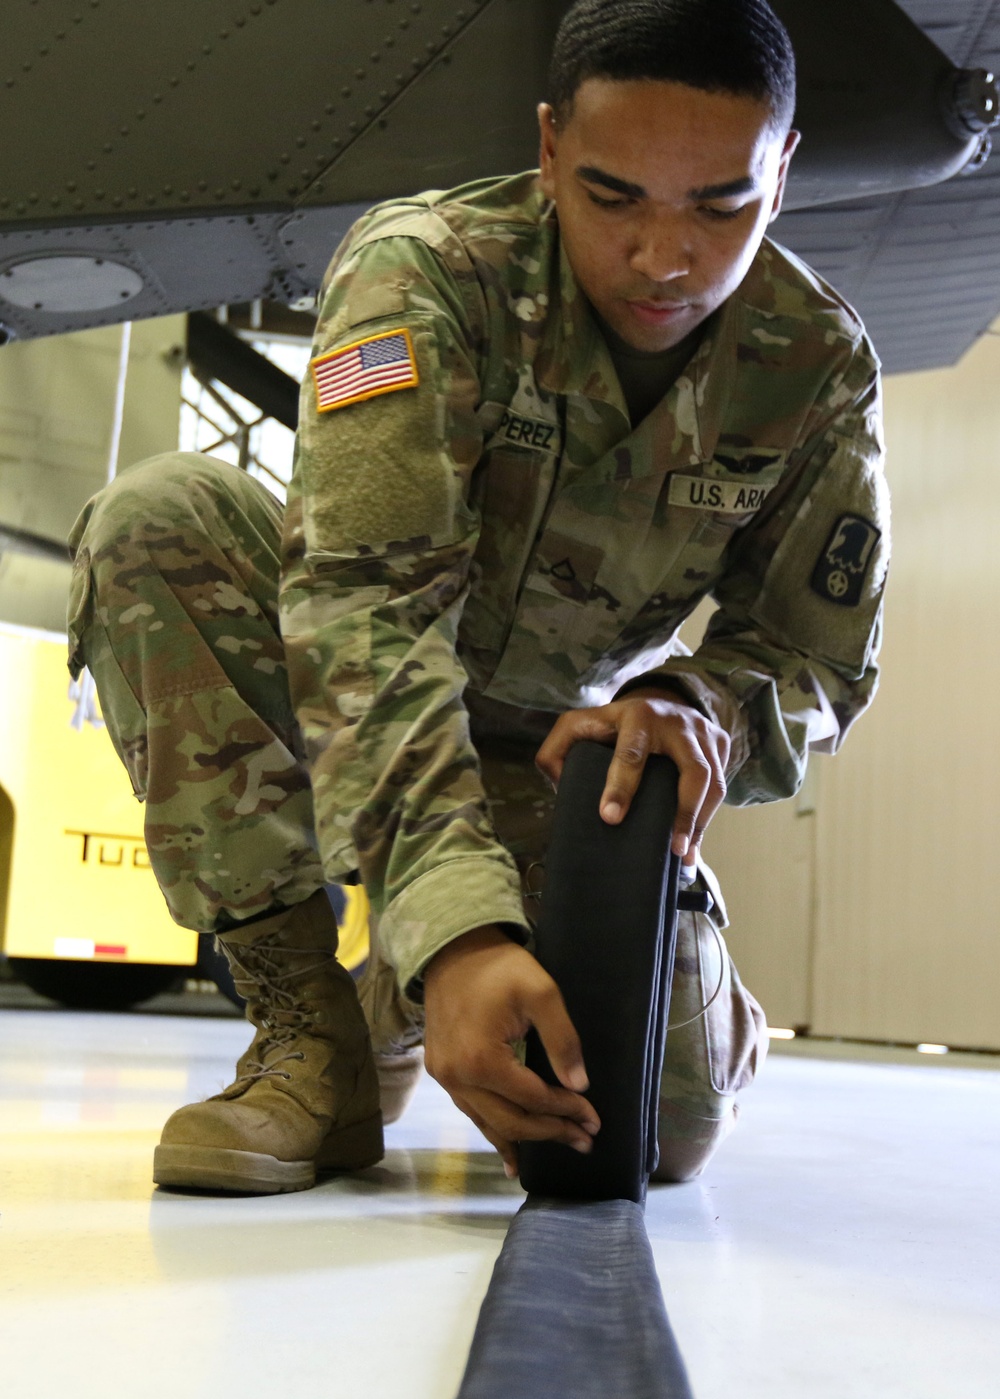 Ready to Roll: U.S. Army Reserve Soldiers prepare for FARP operations